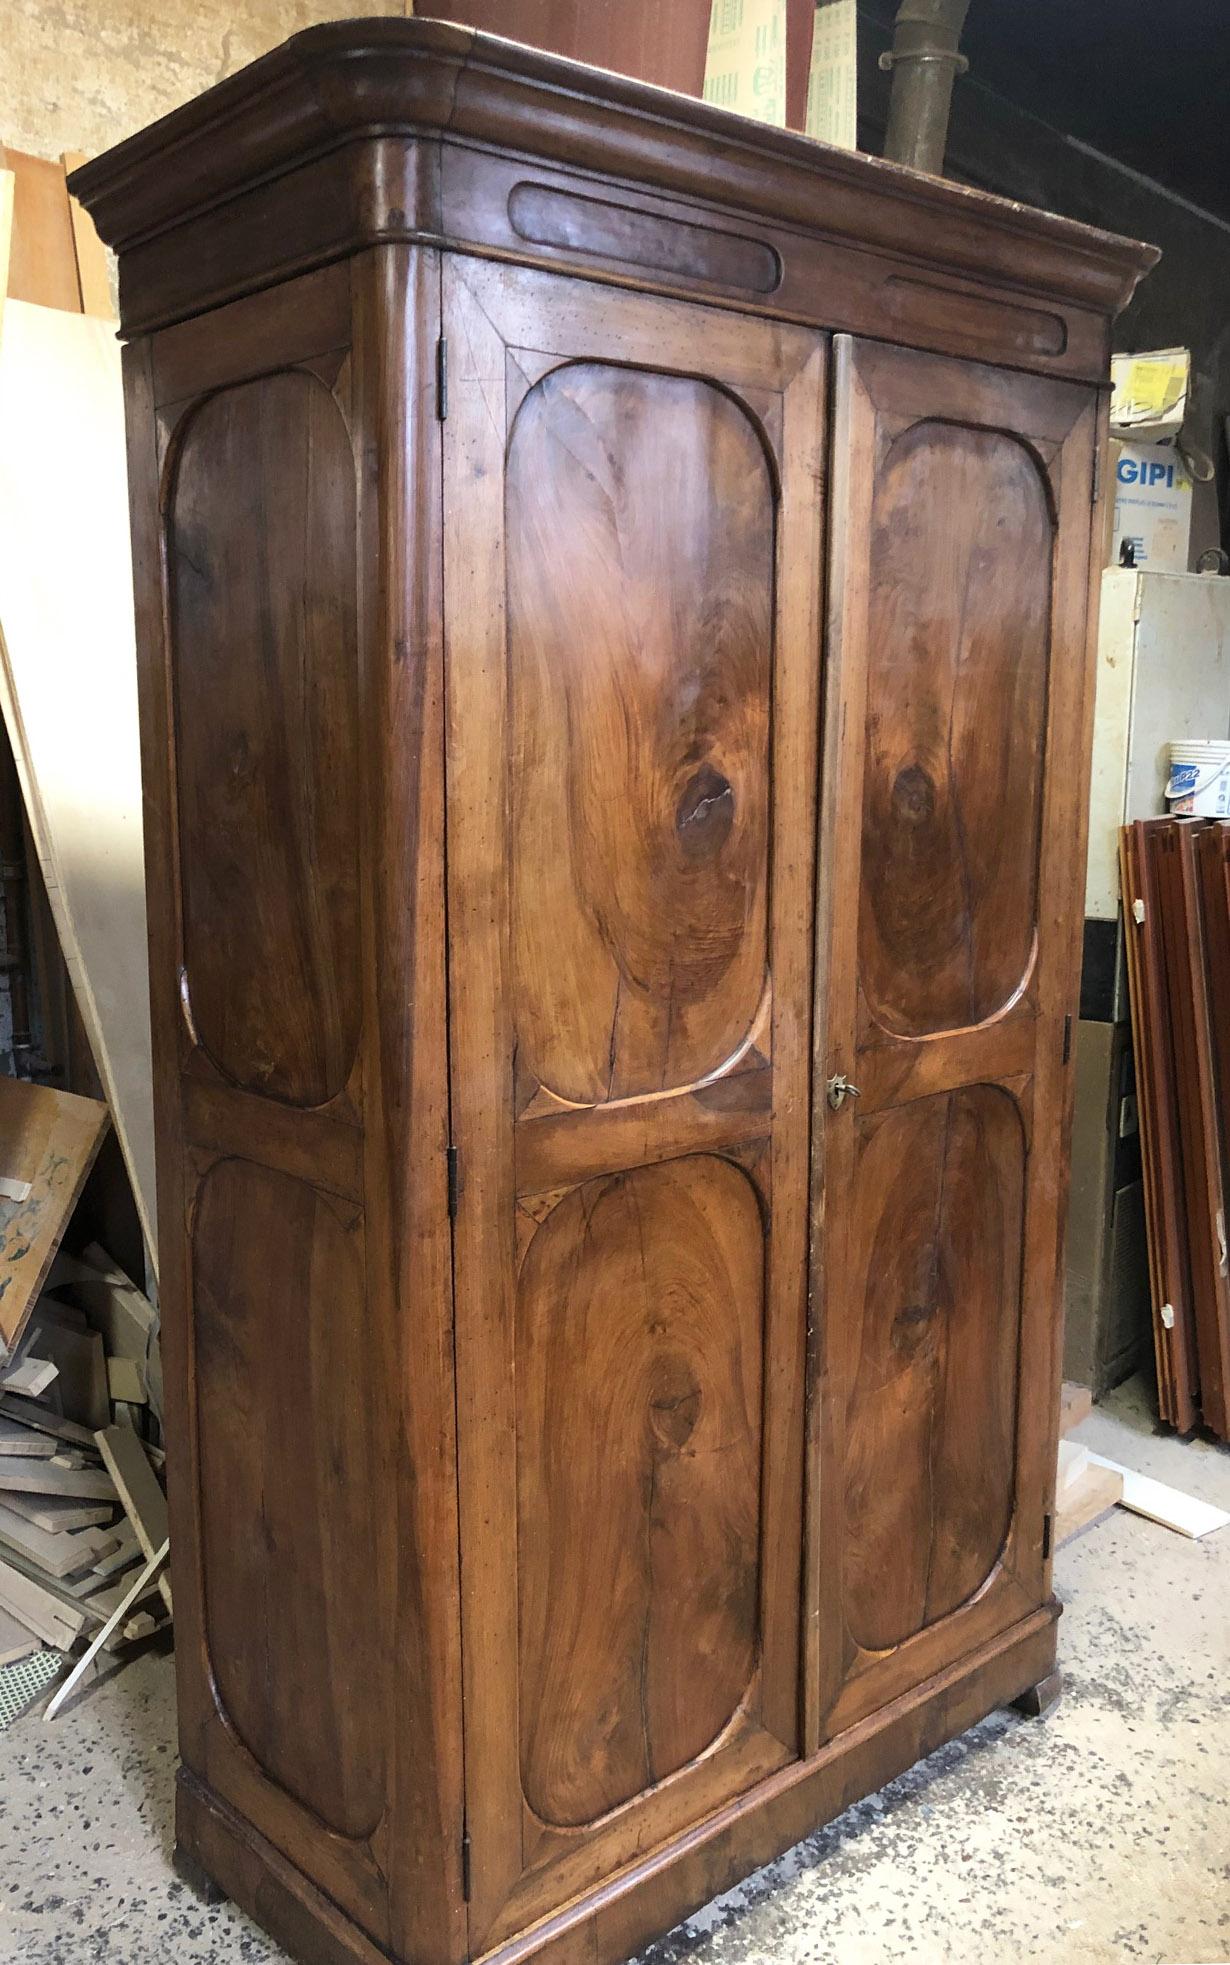 Tuscan in solid walnut wardrobe.
Antique original.
Very rare design and color.
Inside there is a clothes rail and a shelf
It is an ideal piece of furniture for the study, at the entrance of the house or in the kitchen as a pantry.
The piece of